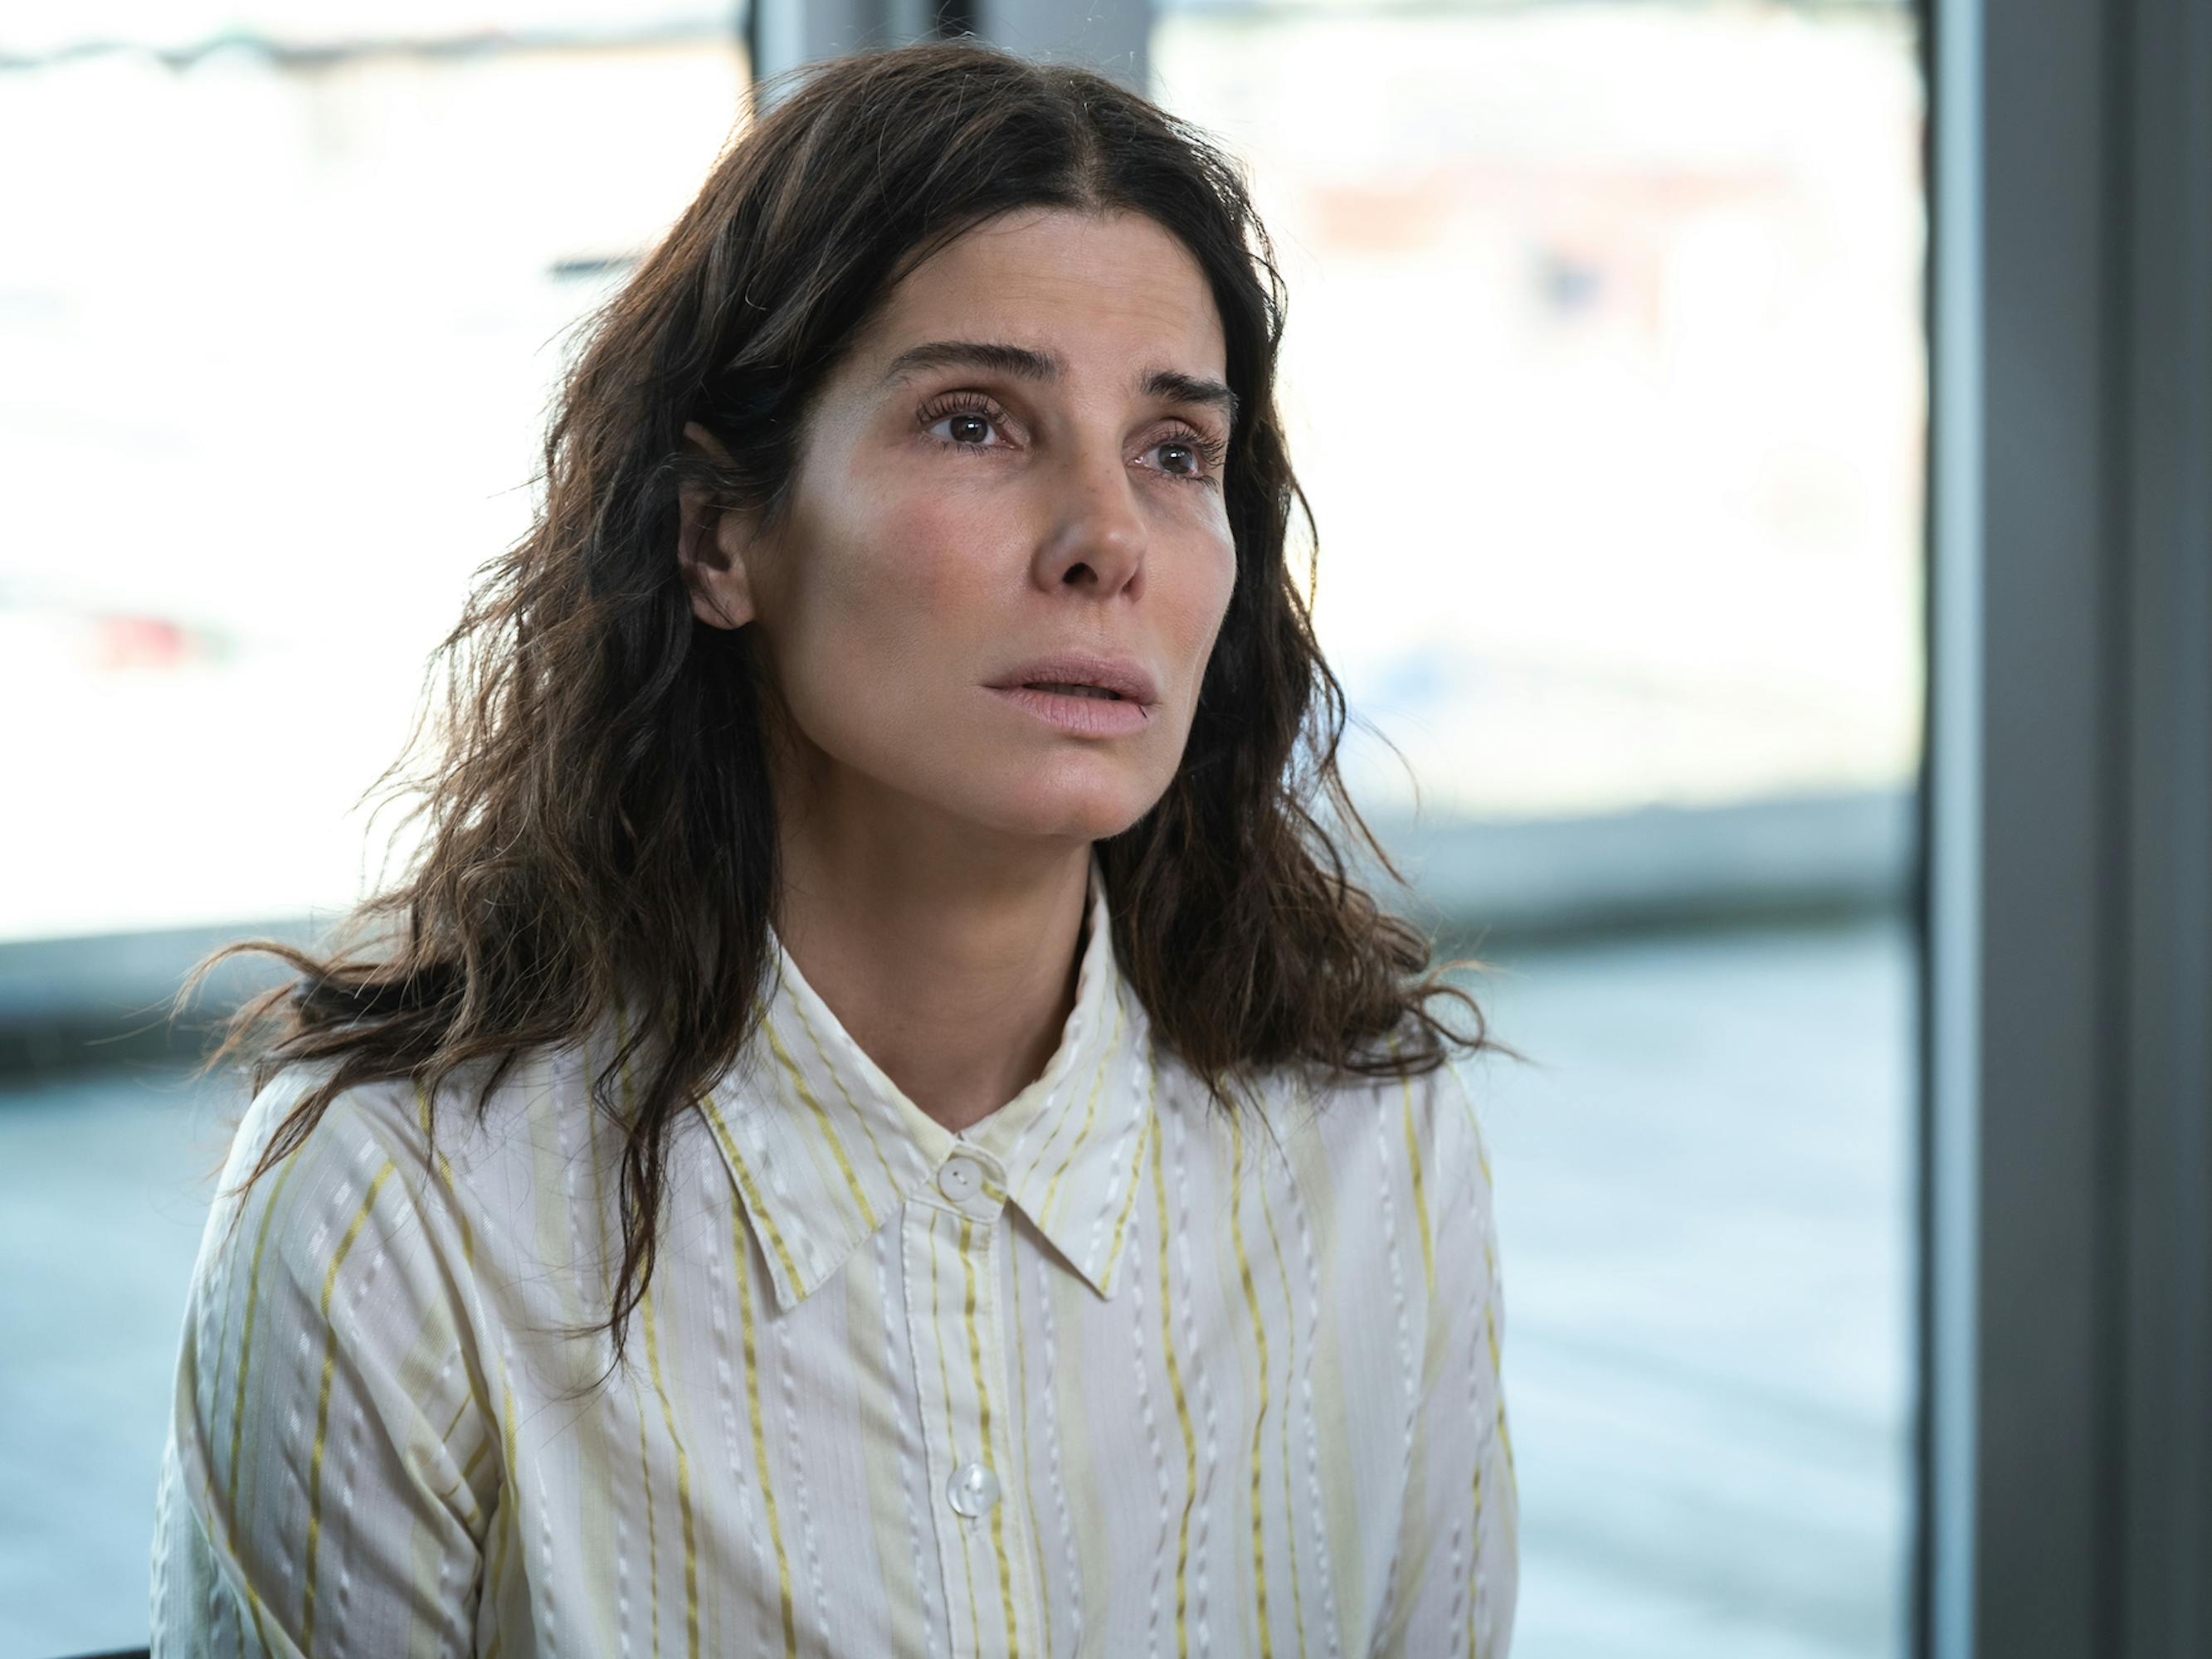 Ruth Slater (Sandra Bullock) wears a white blouse and looks pleadingly at someone offscreen. 